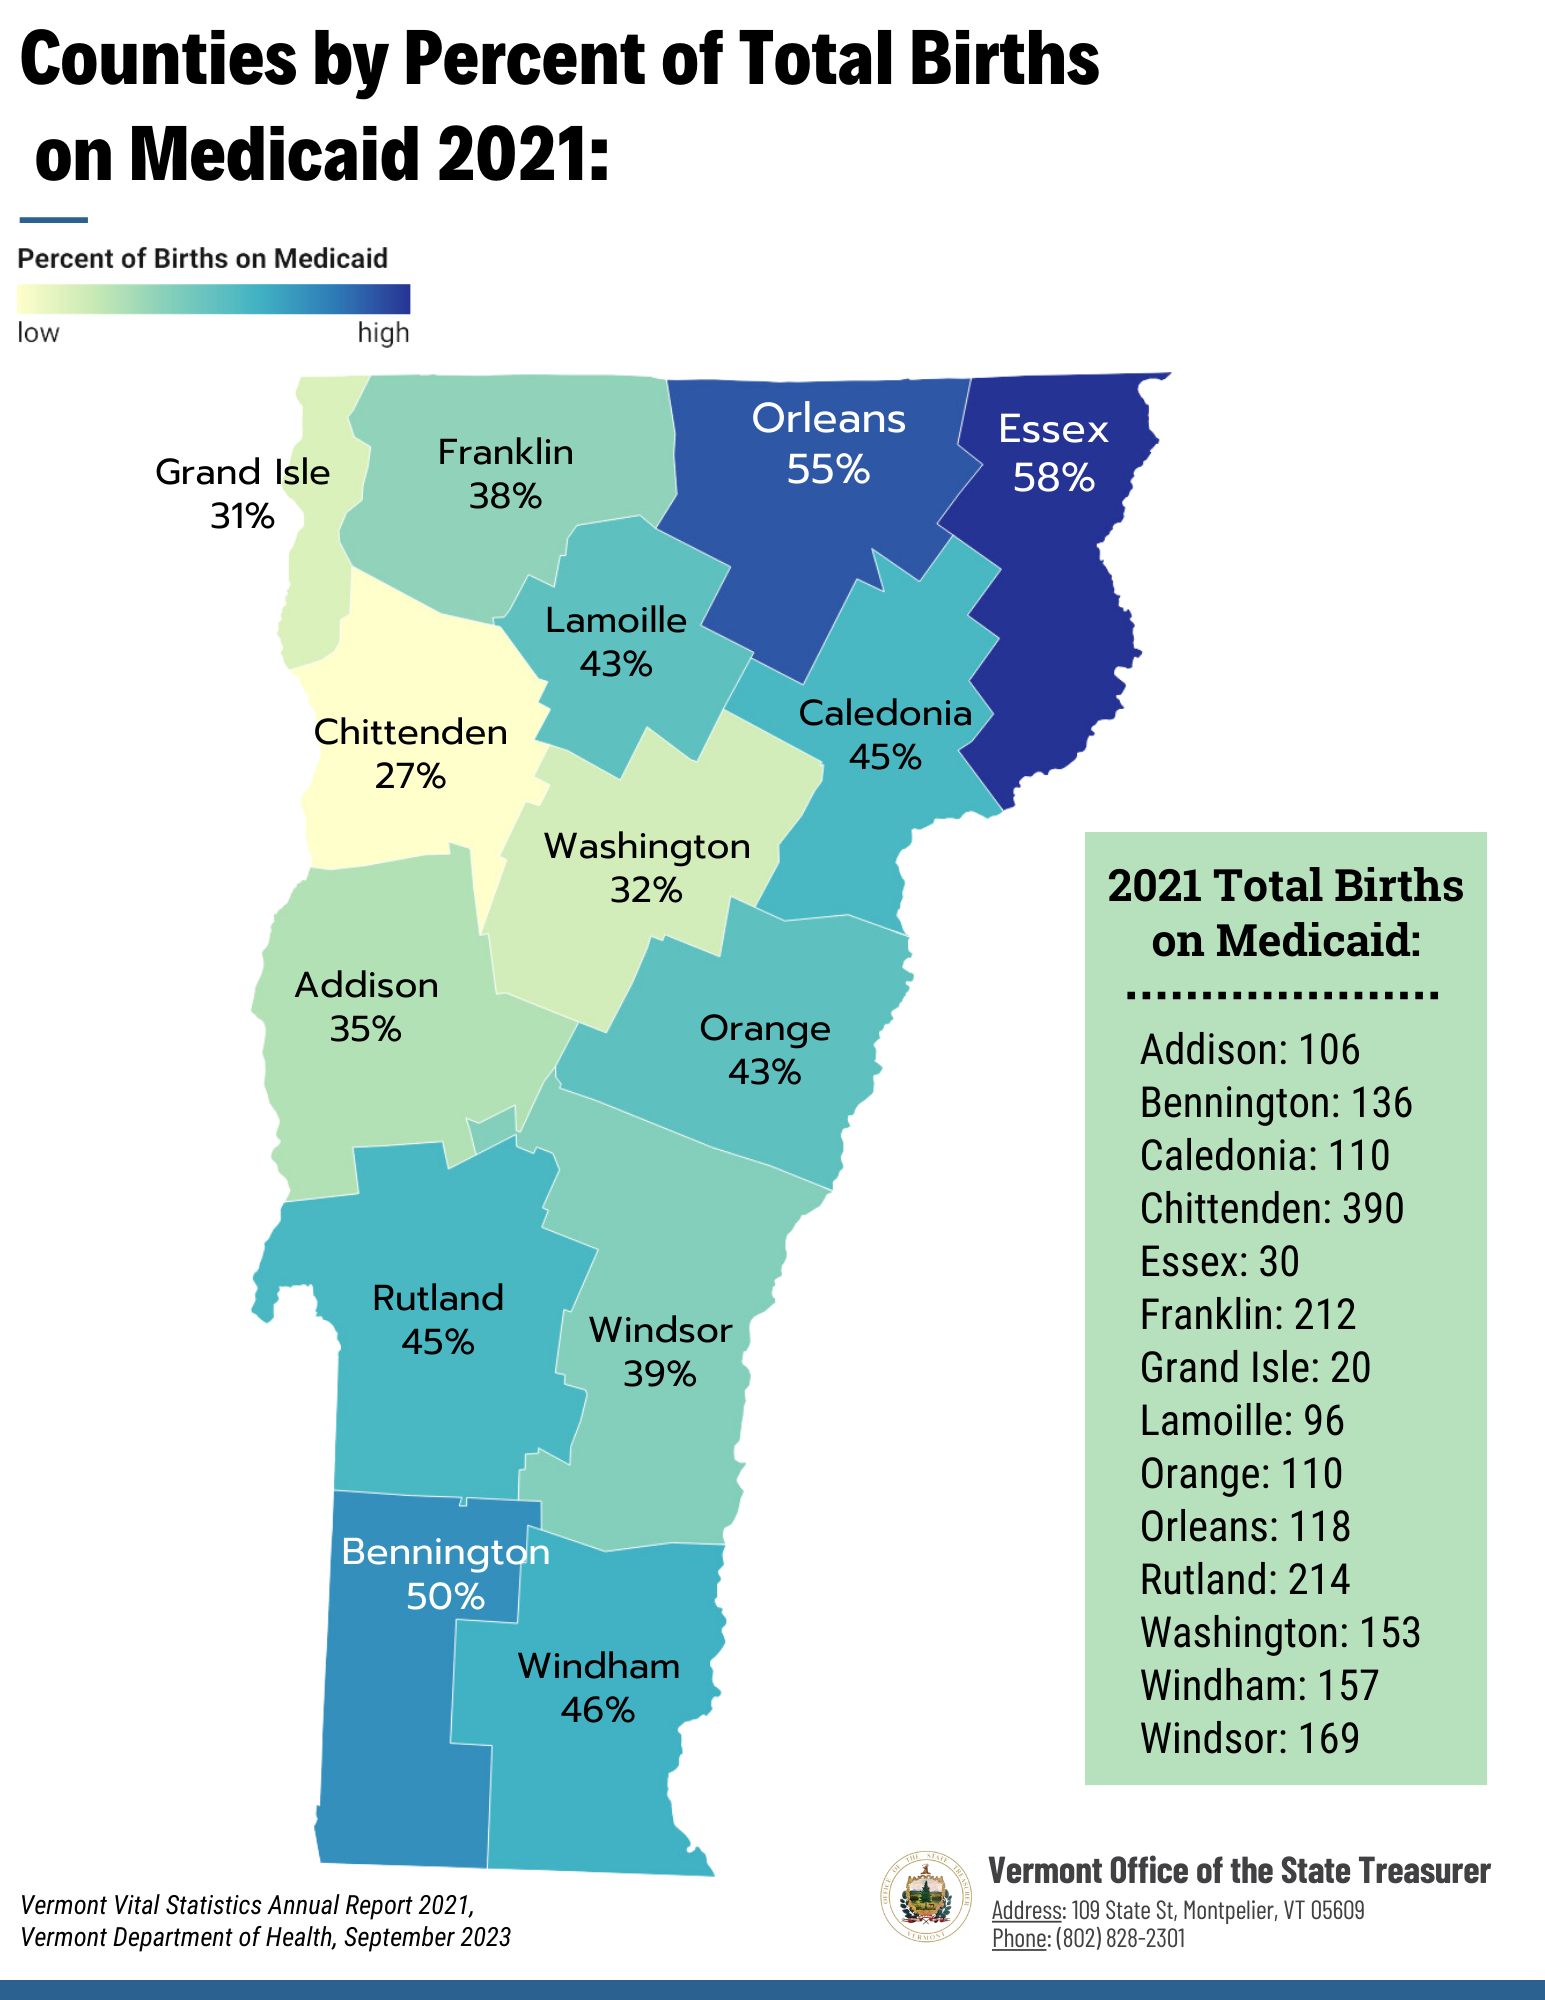 Map of Vermont counties by percent of total births on medicaid in 2021.